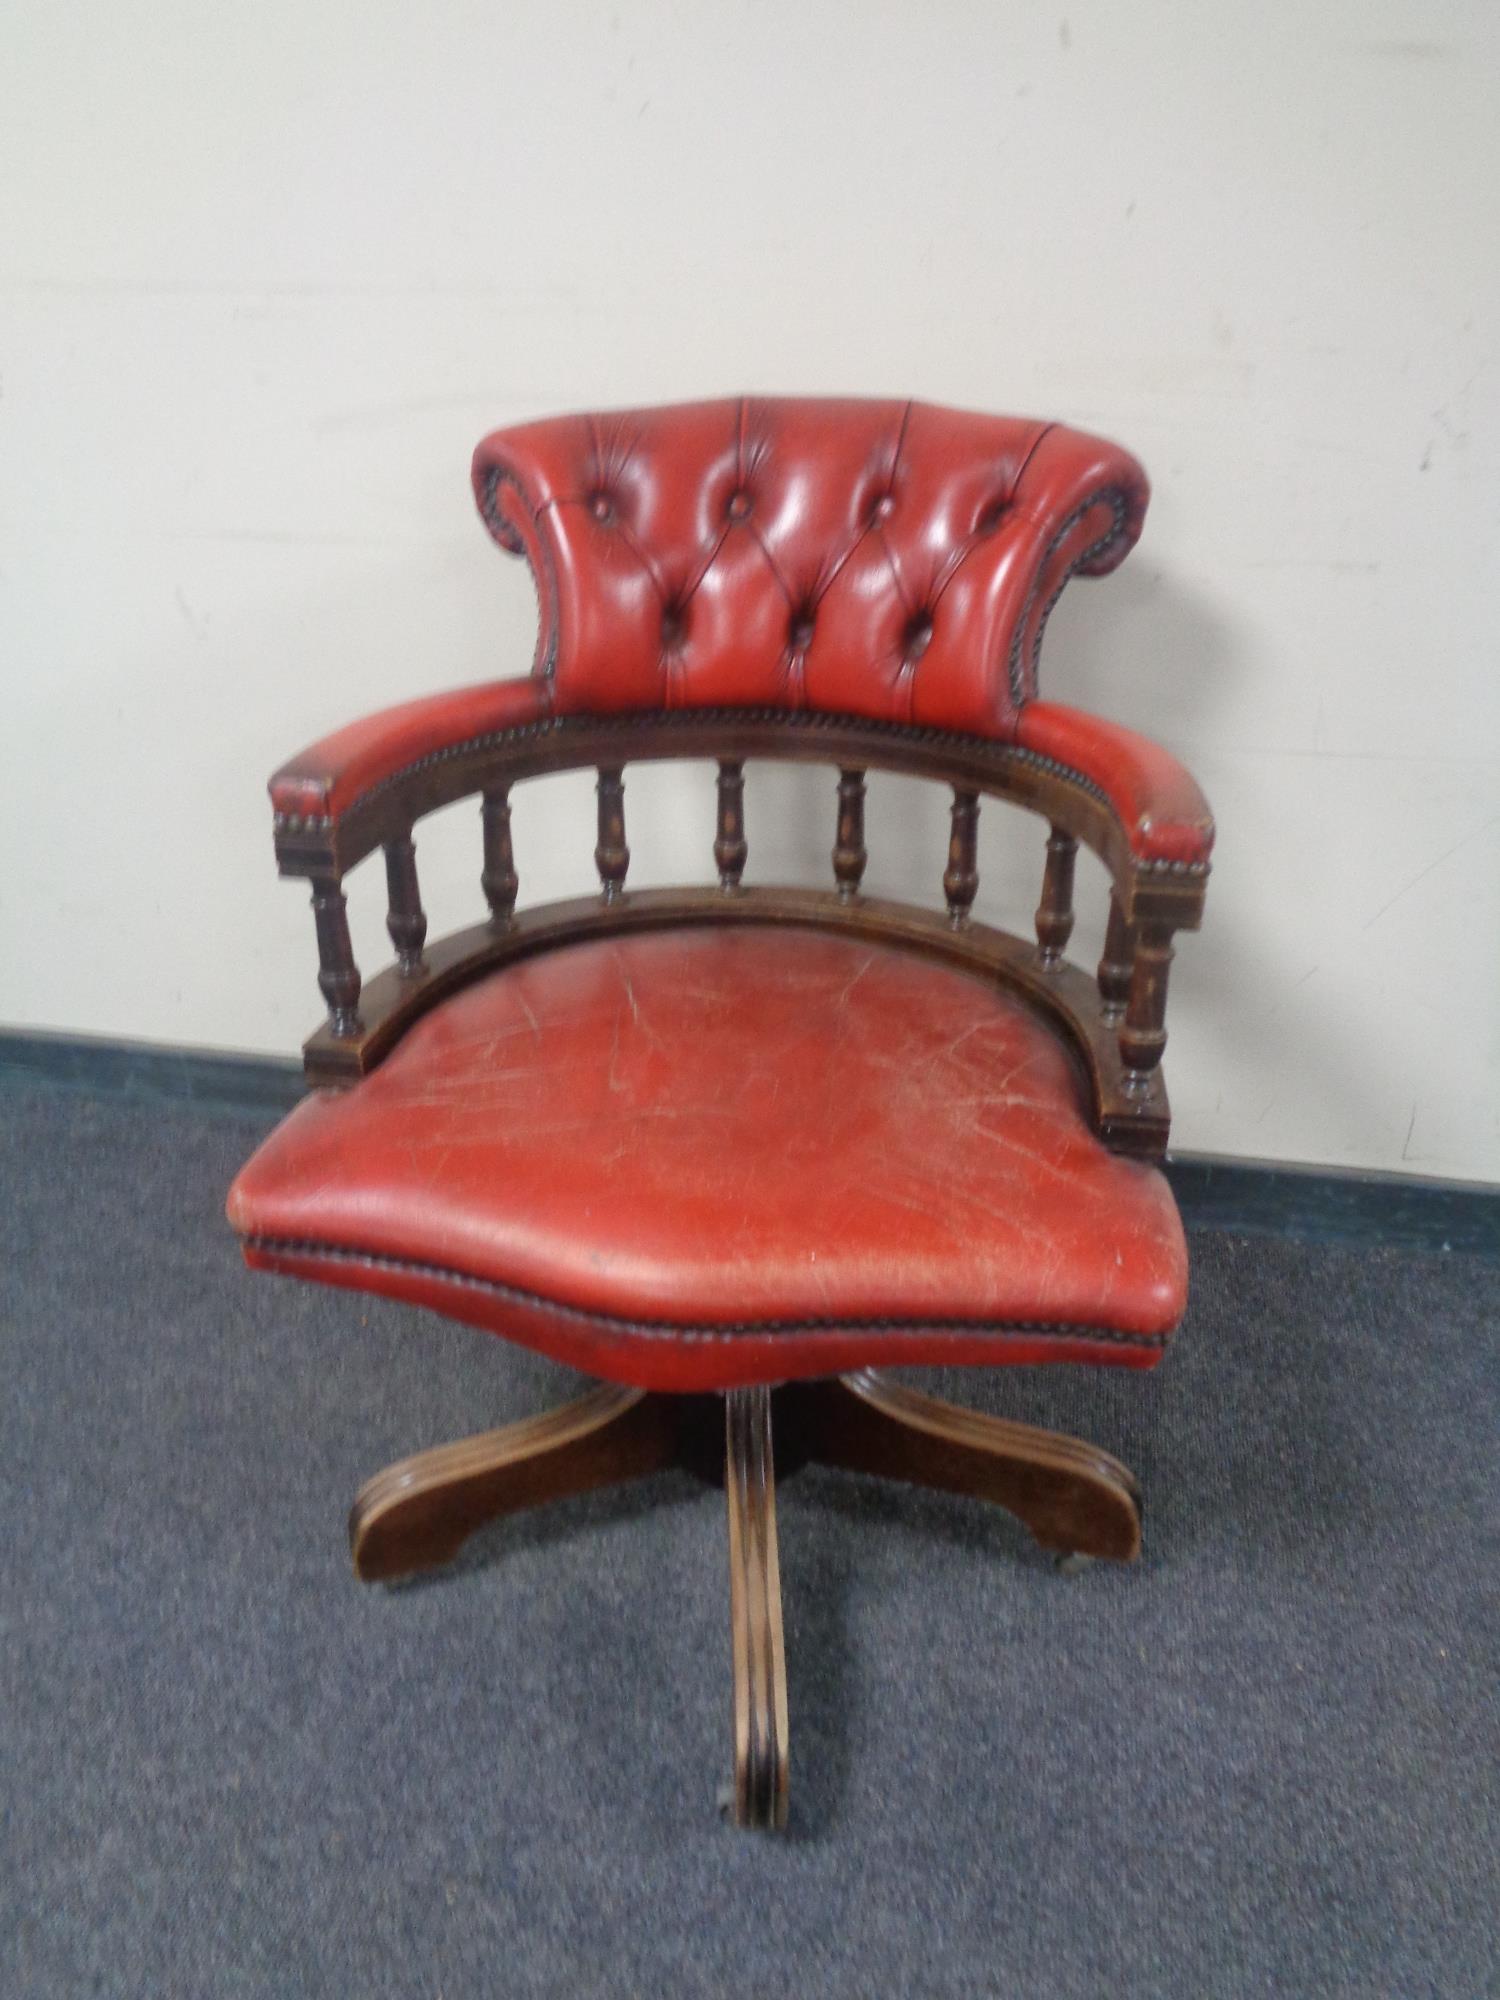 A captain's desk chair upholstered in a red button leather.